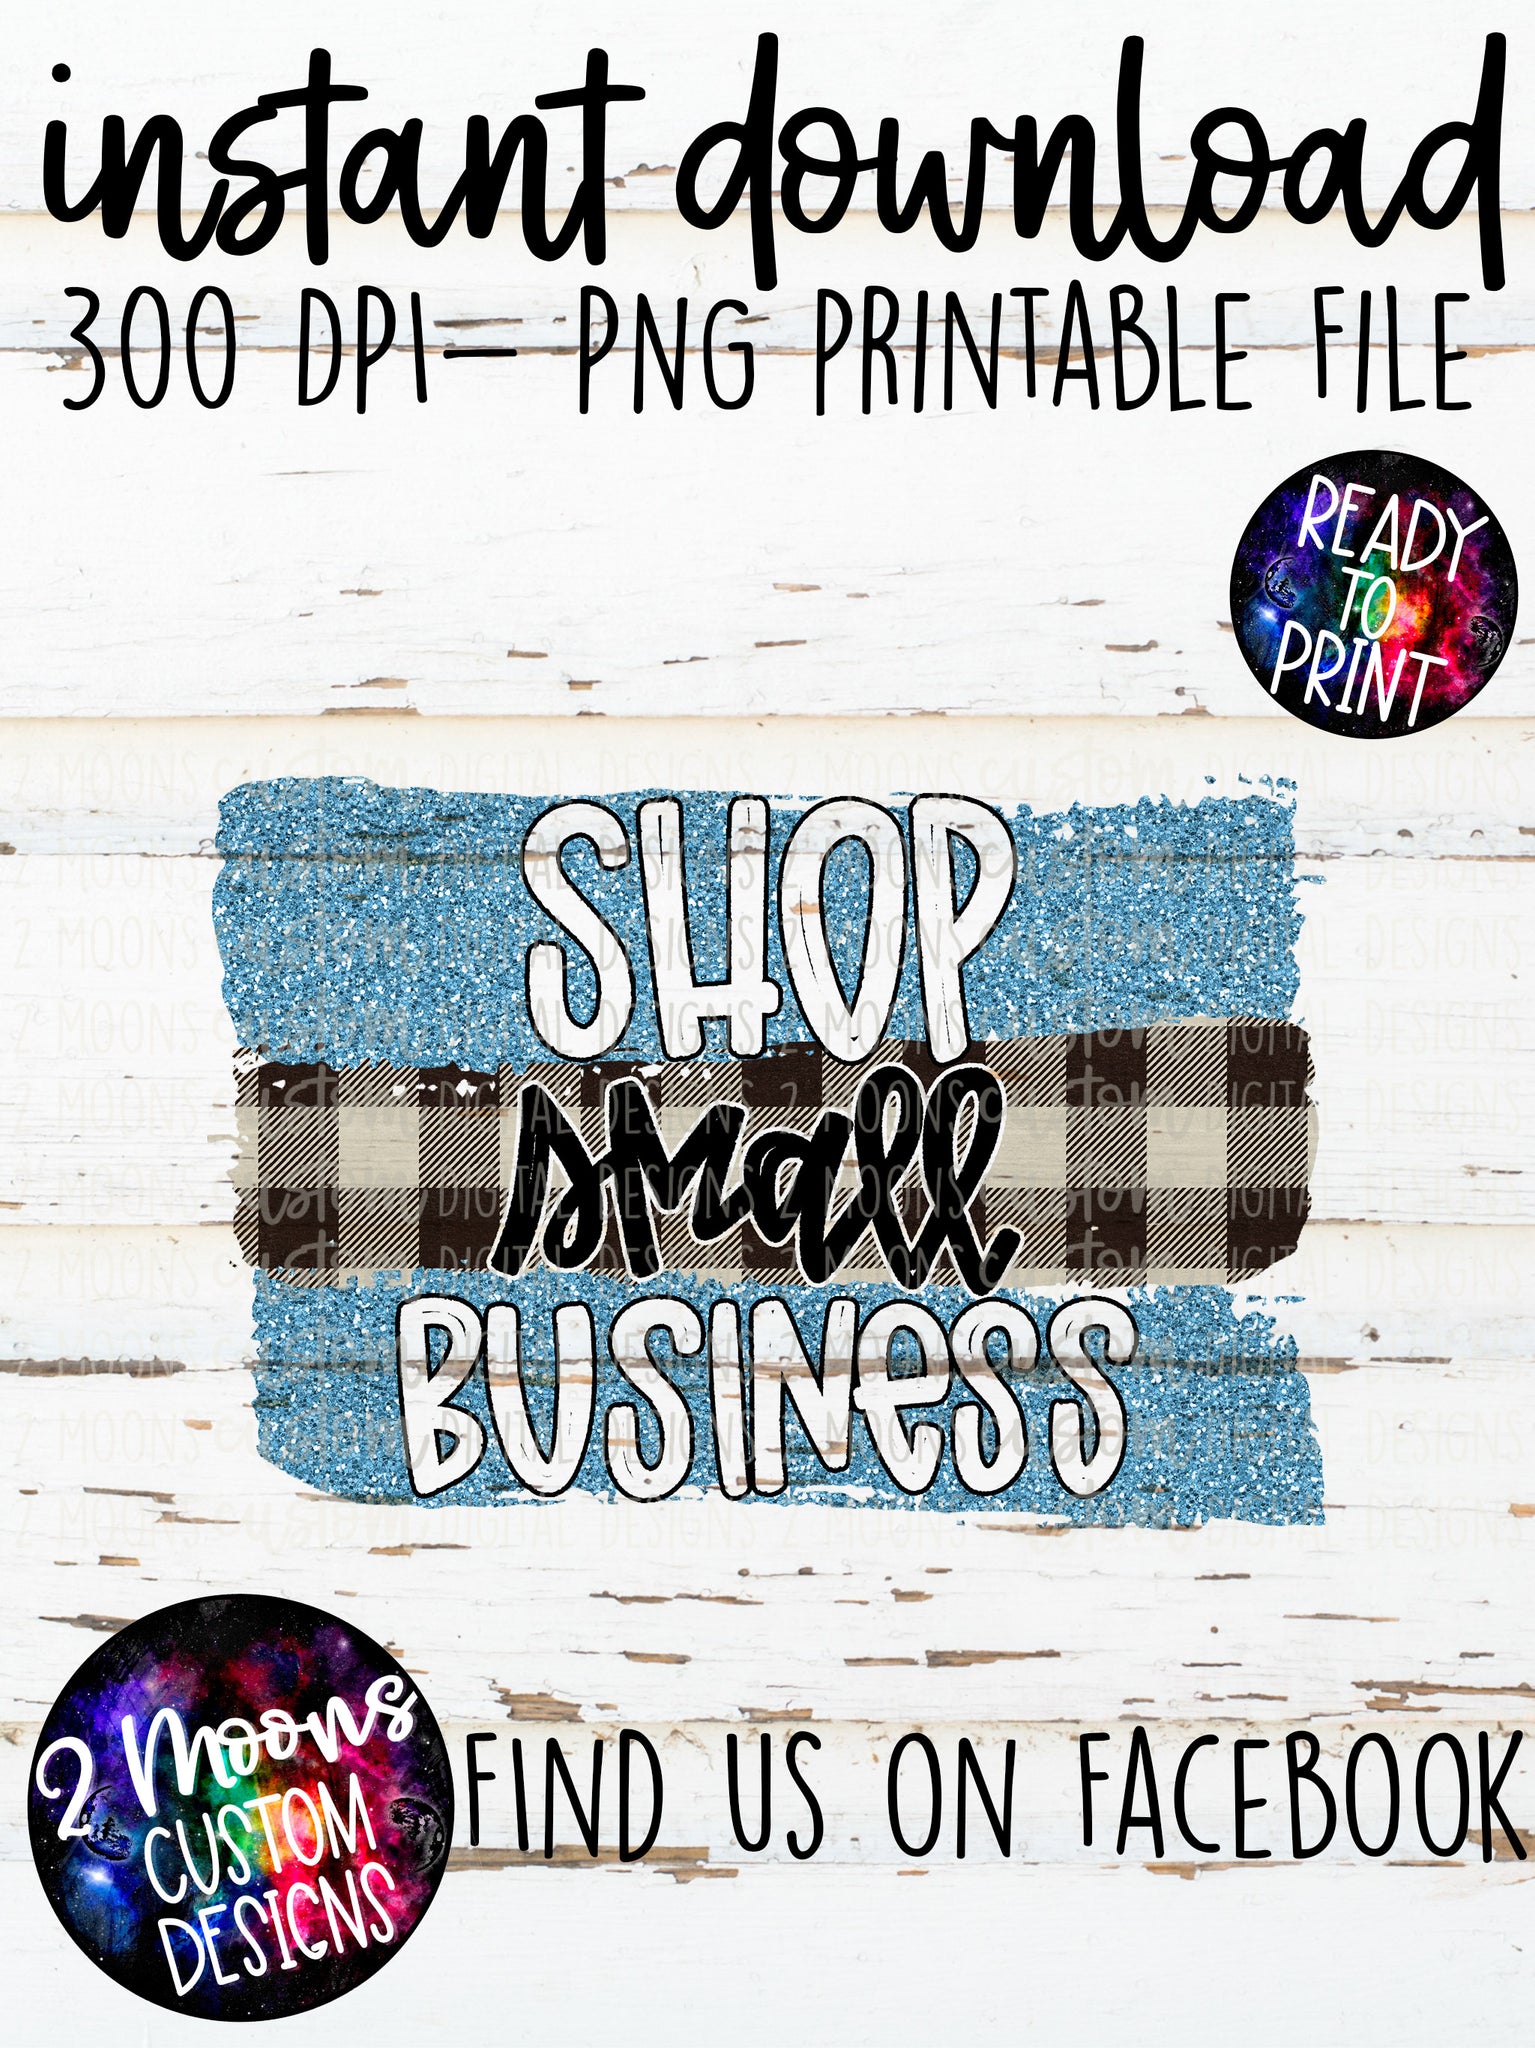 Shop Small Business- Ice Blue